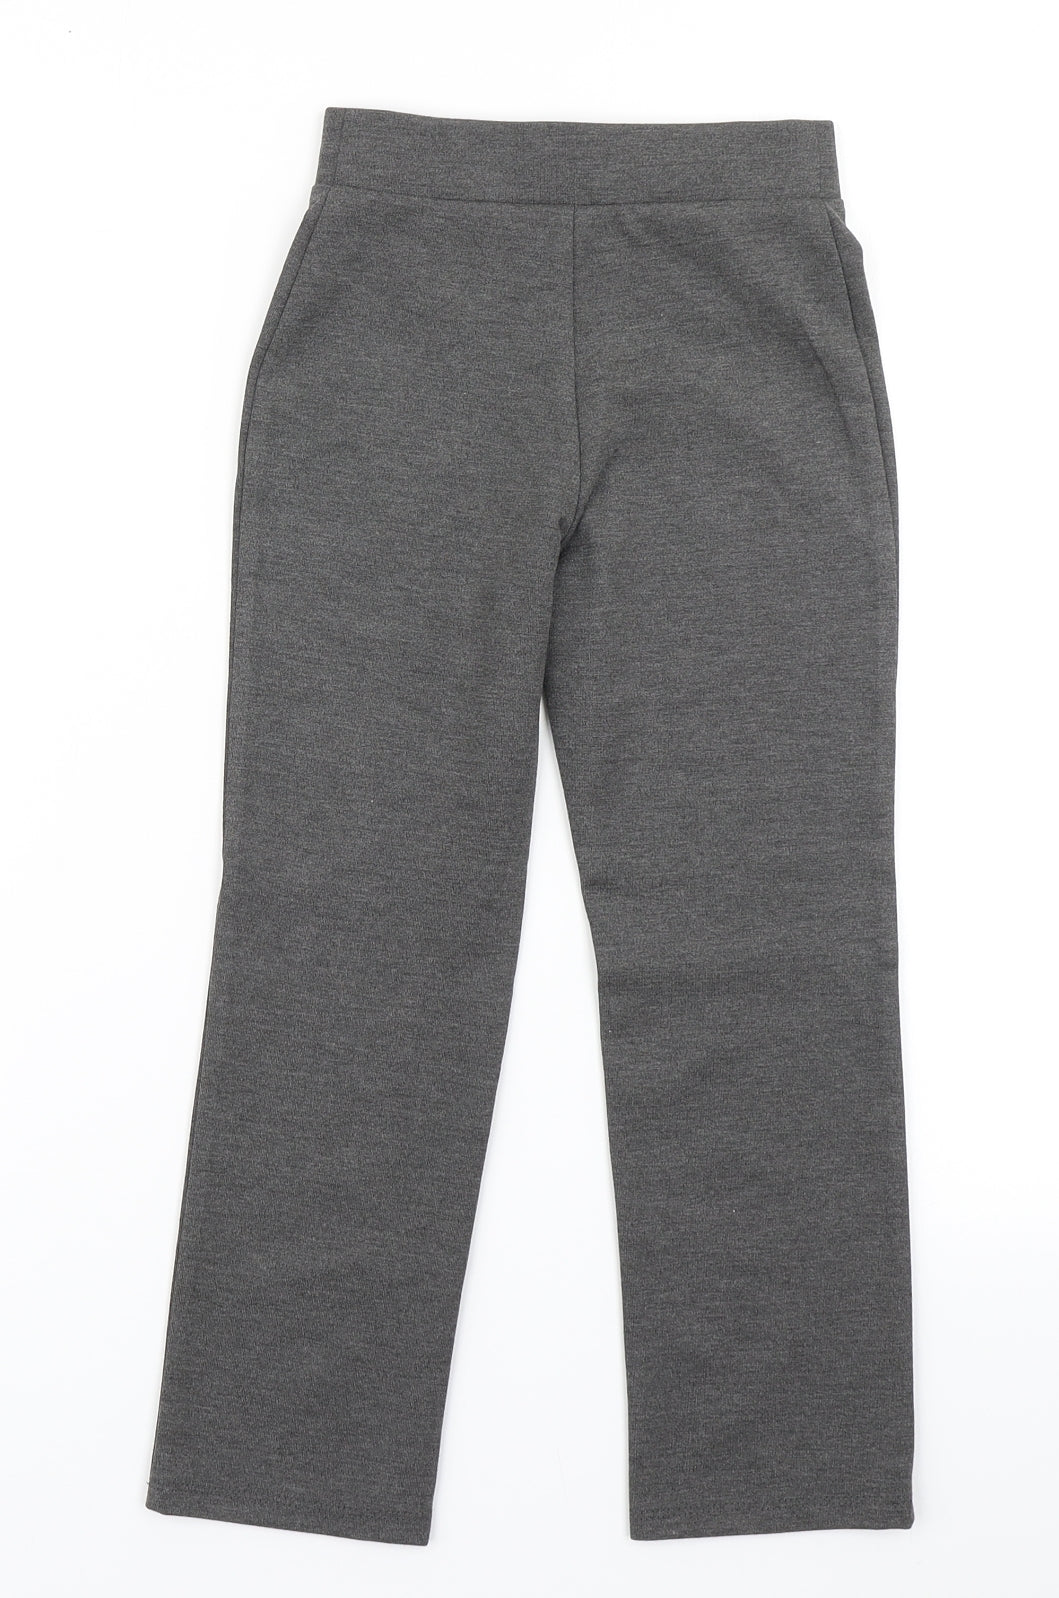 George Girls Grey  Polyester Dress Pants Trousers Size 5-6 Years  Regular